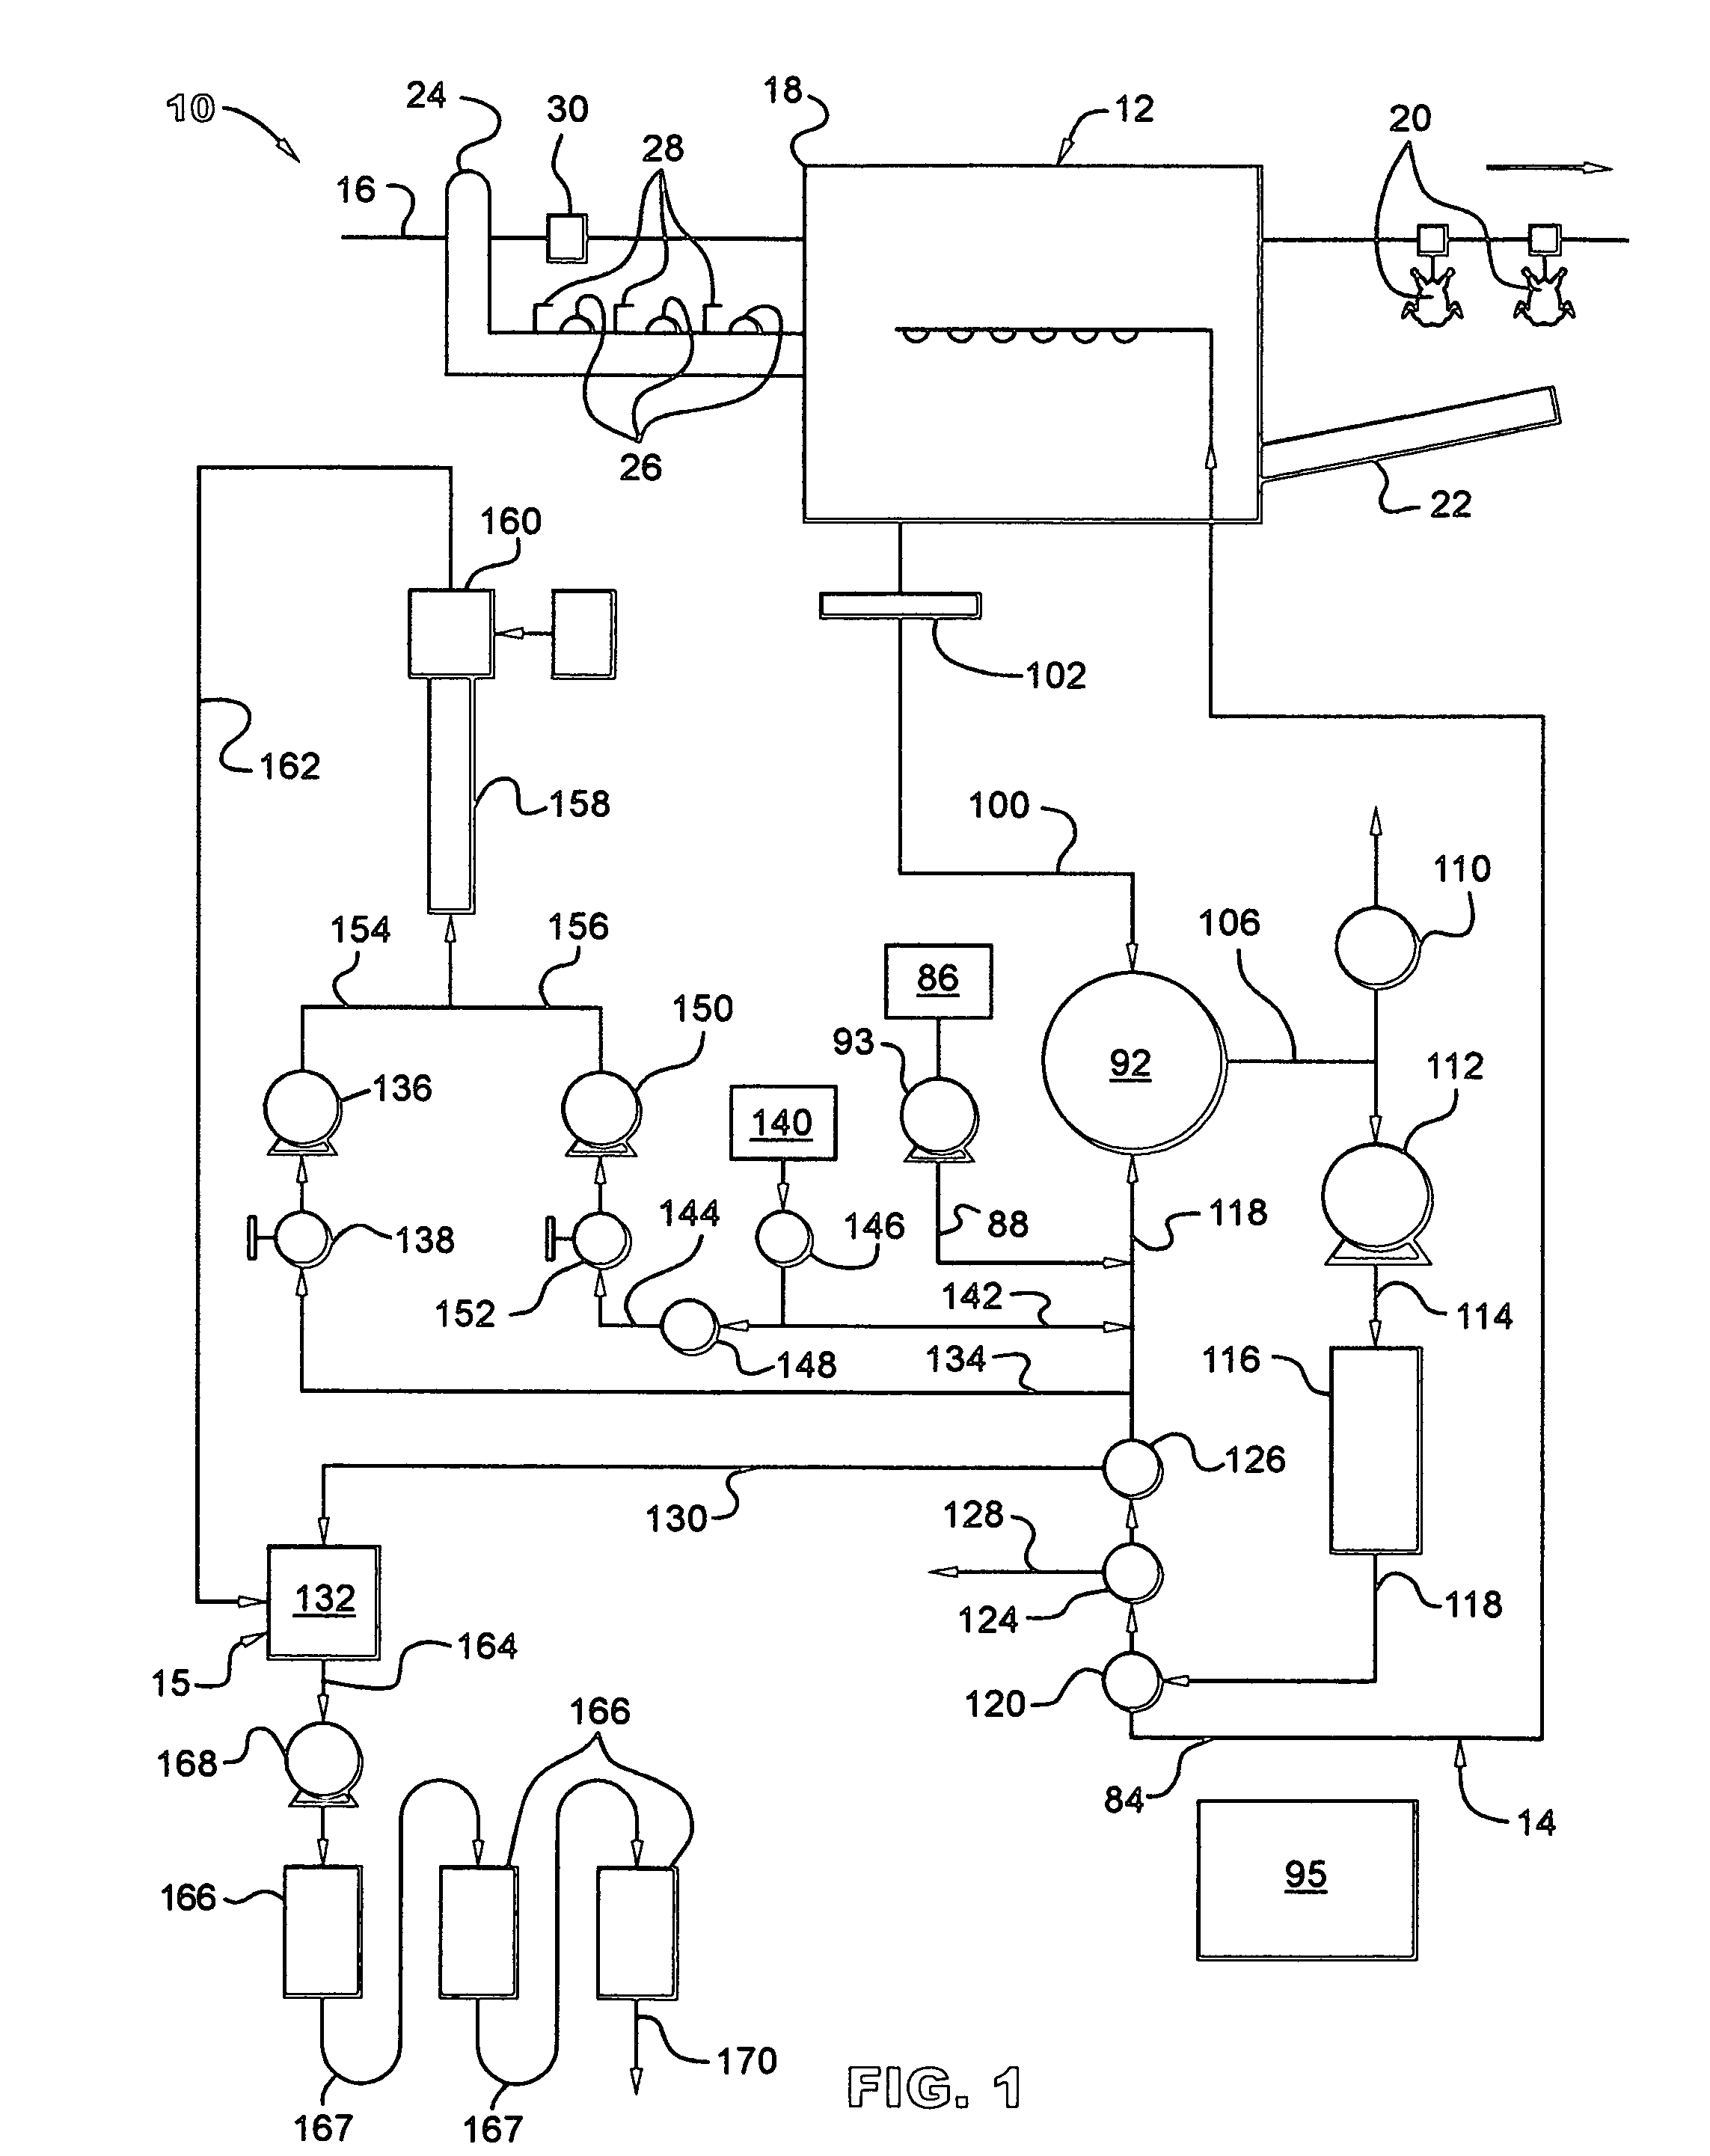 Application system with recycle and related use of antimicrobial quaternary ammonium compound